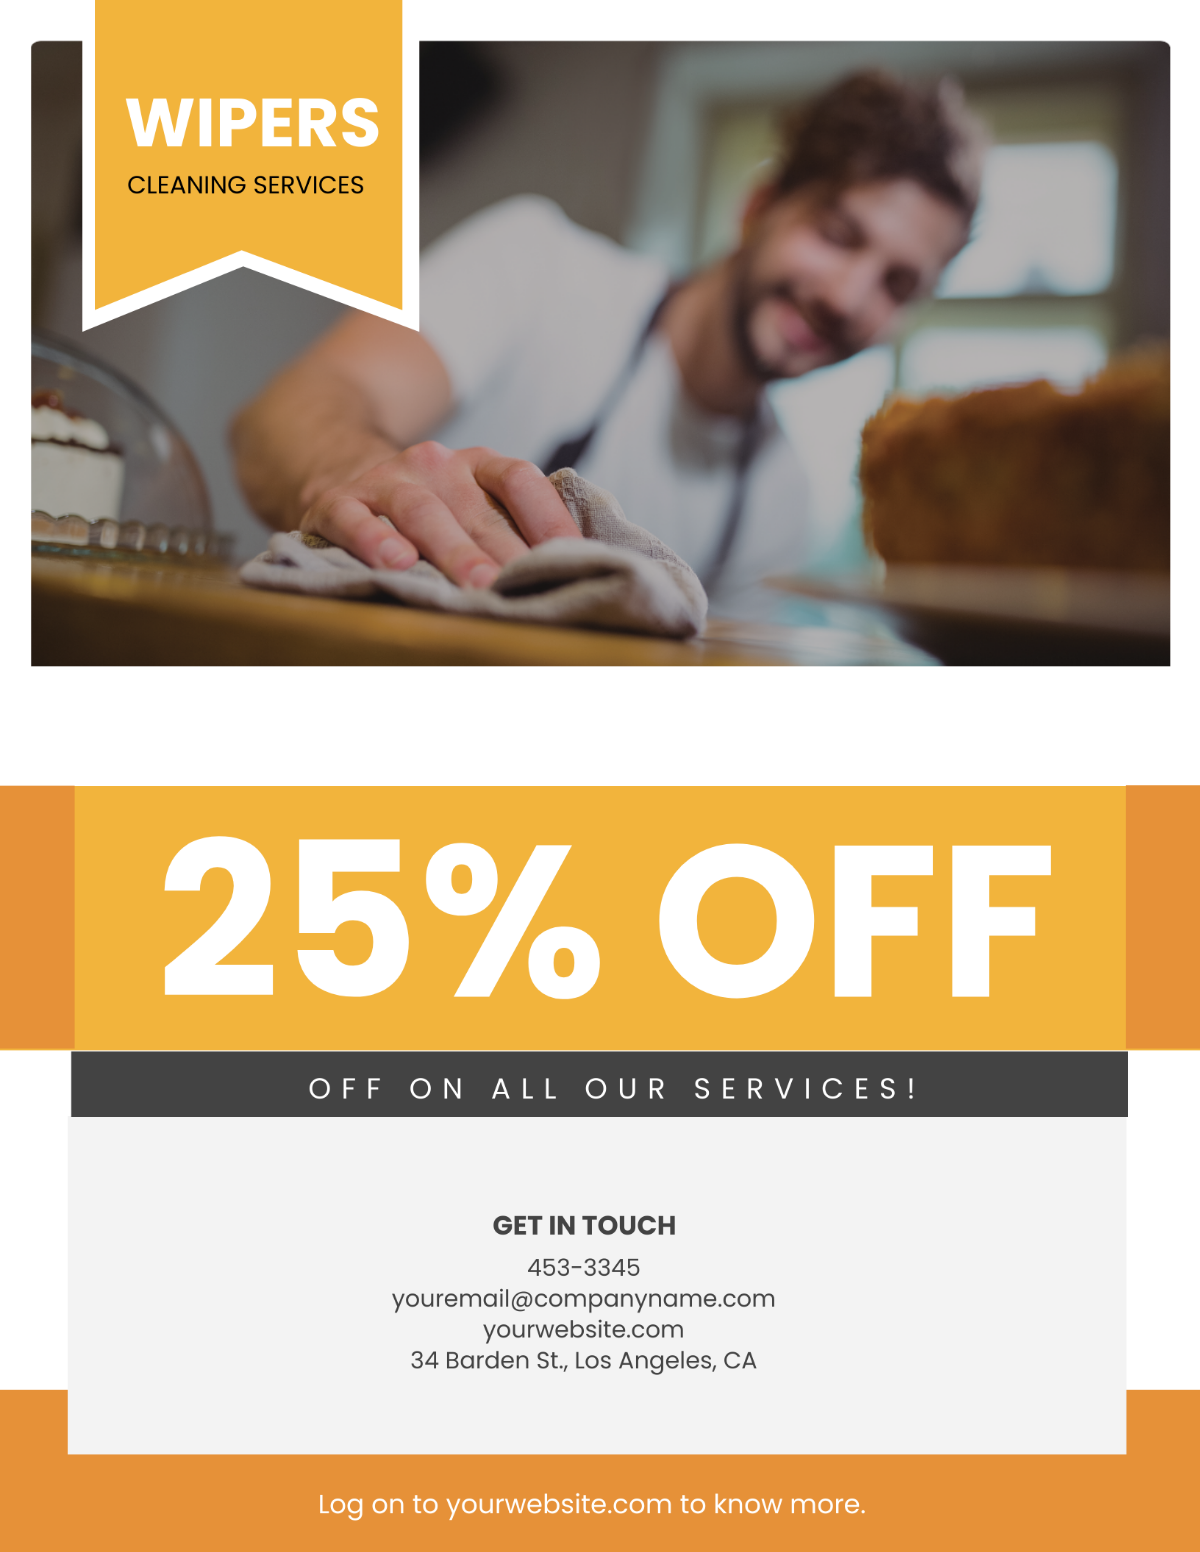 Professional Cleaning Services Flyer Template